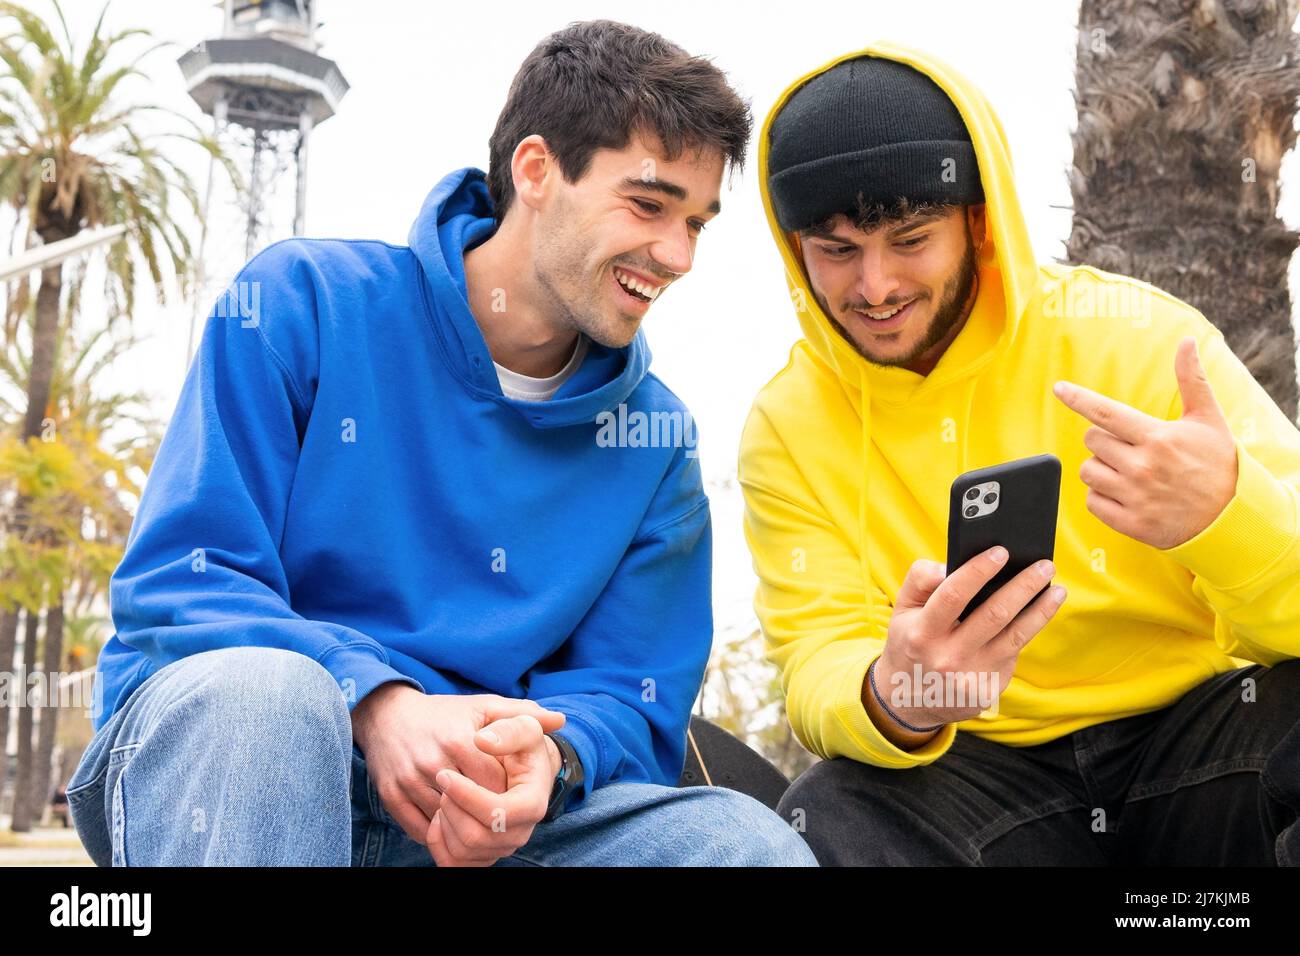 Two cheerful friends with colorful outfits using phone while sitting on street Stock Photo